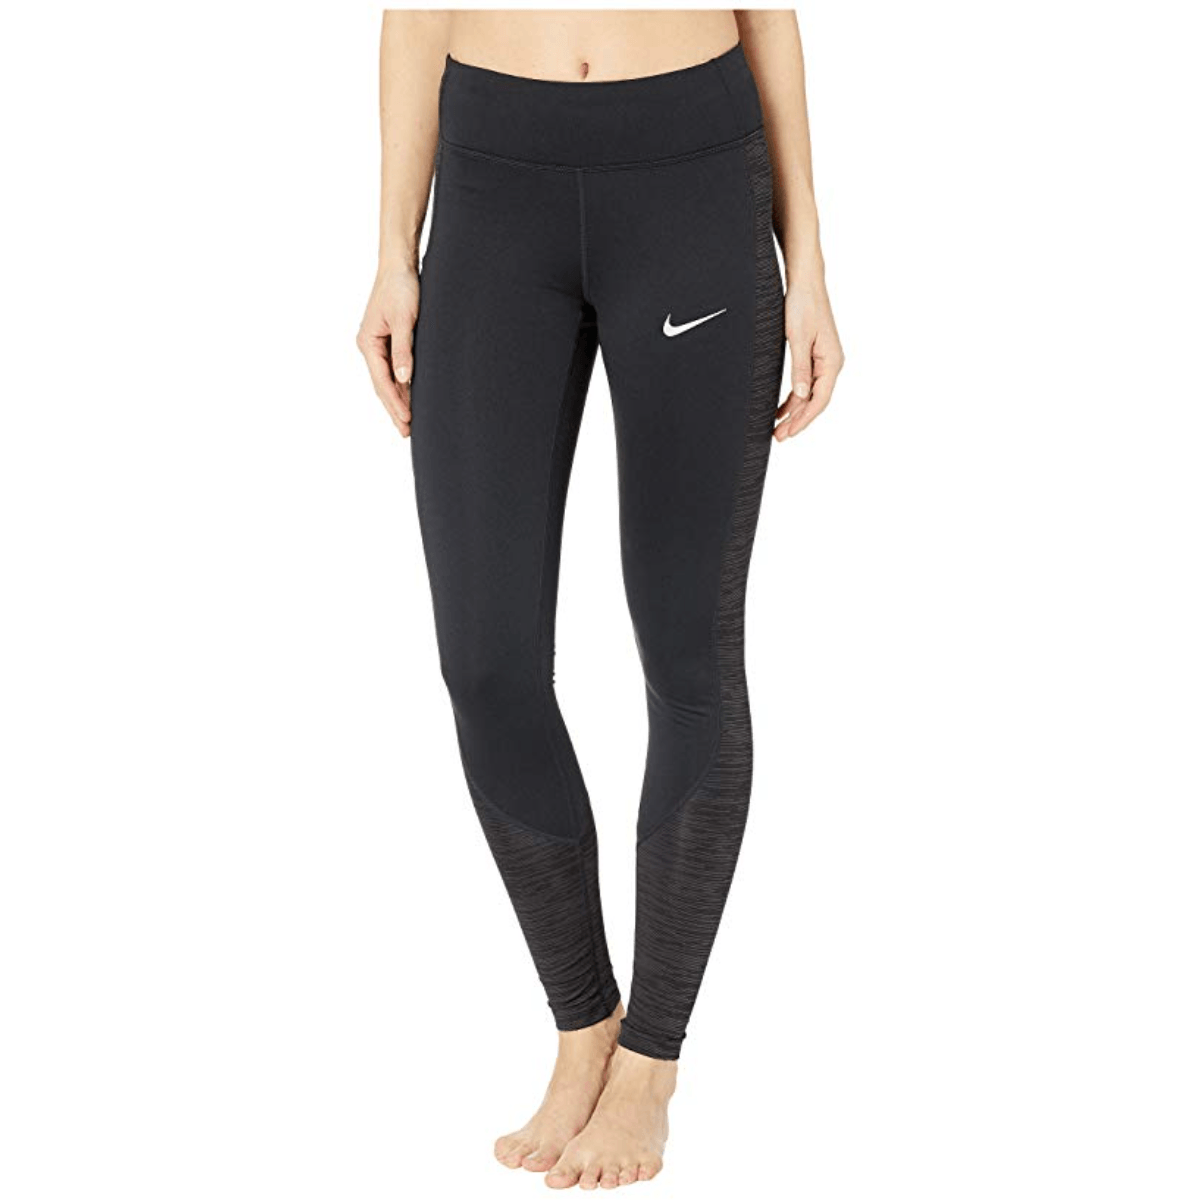 NIKE Thermal Women's Dri-Fit Running Tights Style 547388-010 size